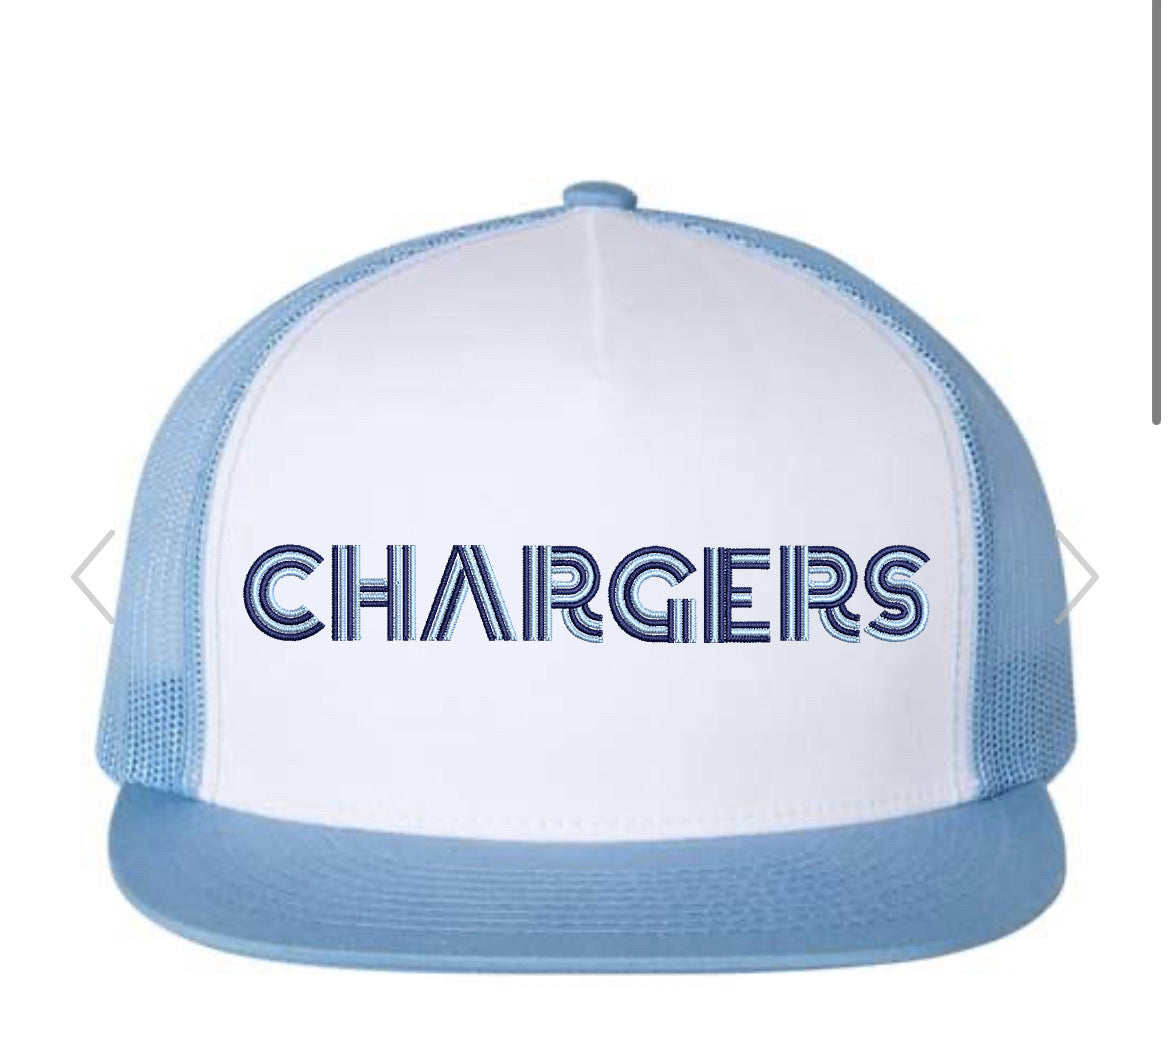 Retro Blue Chargers Trucker Hat